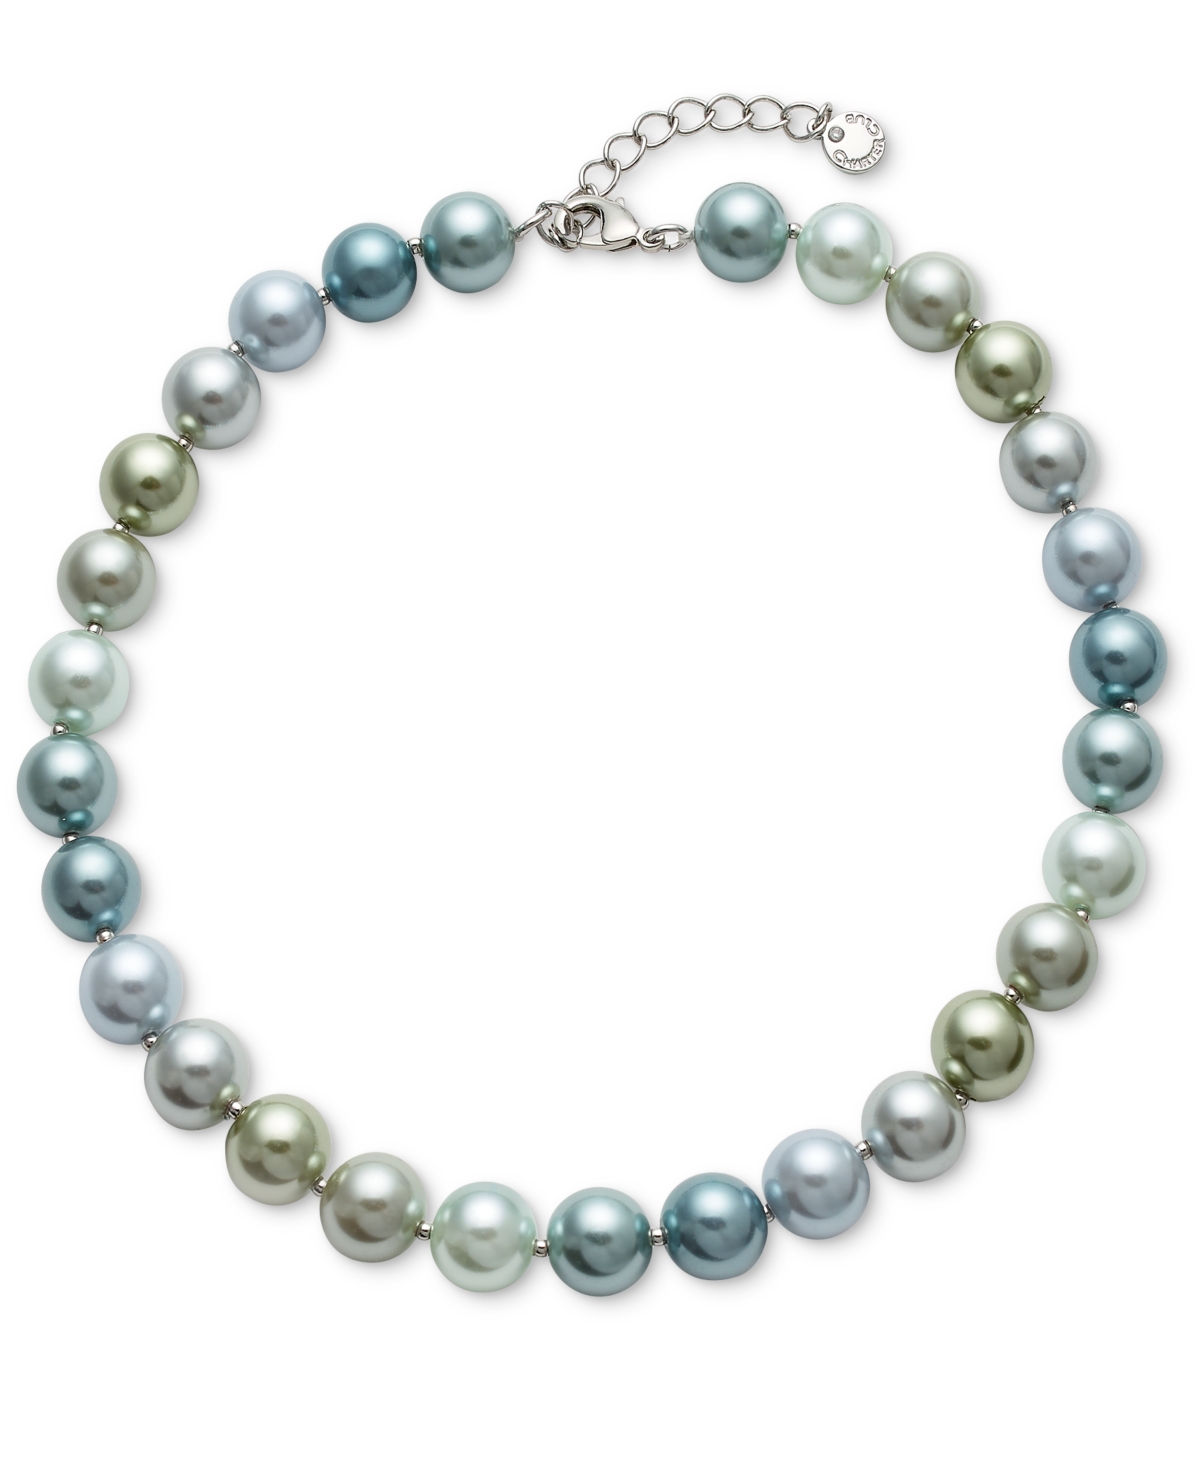 Silver-Tone Color Bead & Imitation Pearl All-Around Collar Necklace, 16"+ 2" extender, Created for Macy's - Multi